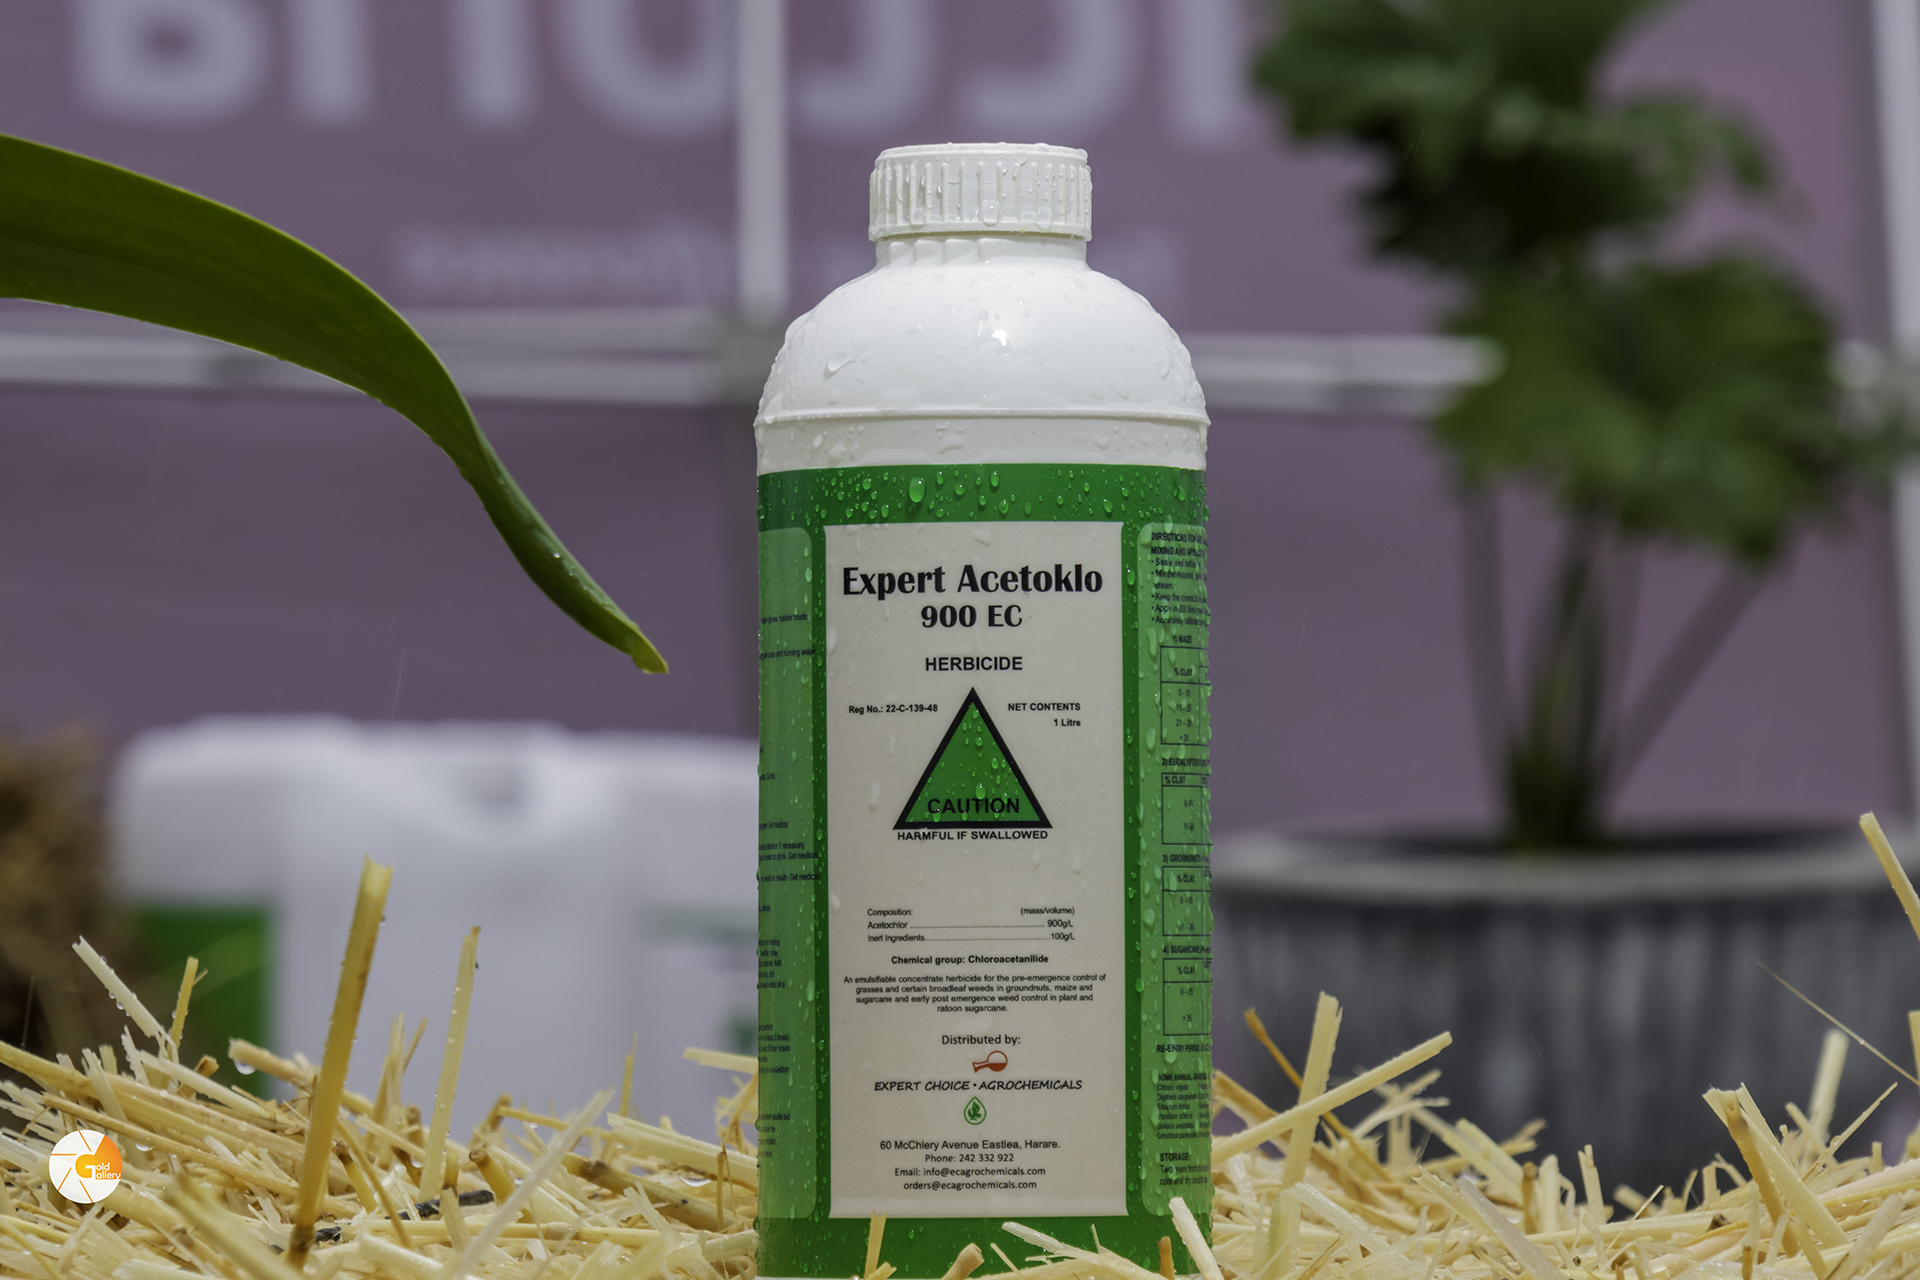 Active InActive Ingredients: Atrazine 47% & other active triazines 3% Description A selective herbicide for the control of numerous broad leaved weeds in maize, sorghum and sugarcane.gActive IngredActive Ingredients: Atrazine 47% & other active triazines 3% Description A selective herbicide for the control of numerous broad leaved weeds in maize, sorghum and sugarcane.ients: Atrazine 47% & other active triazines 3% Description A selective herbicide for the control of numerous broad leaved weeds in maize, sorghum and sugarcane.Active Ingredients: Atrazine 47% & other active triazines 3% Description A selective herbicide for the control of numerous broad leaved weeds in maize, sorghum and sugarcane.Active Ingredients: Atrazine 47% & other active triazines 3% Description A selective herbicide for the control of numerous broad leaved weeds in maize, sorghum and sugarcane.redieActive Ingredients: Atrazine 47% & other active triazines 3% Description: A selective herbicide for the control of numerous broad leaved weeds in maize, sorghum and sugarActive Ingredients: Atrazine 47% & other active triazines 3% Description: A selective herbicide for the control of numerous broad leaved weeds in maize, sorghum and sugarnts: Atrazine 47% & other active triazines 3% Description A selective herbicide for the control of numerous broad leaved weeds in maize, sorghum and sugarcane.